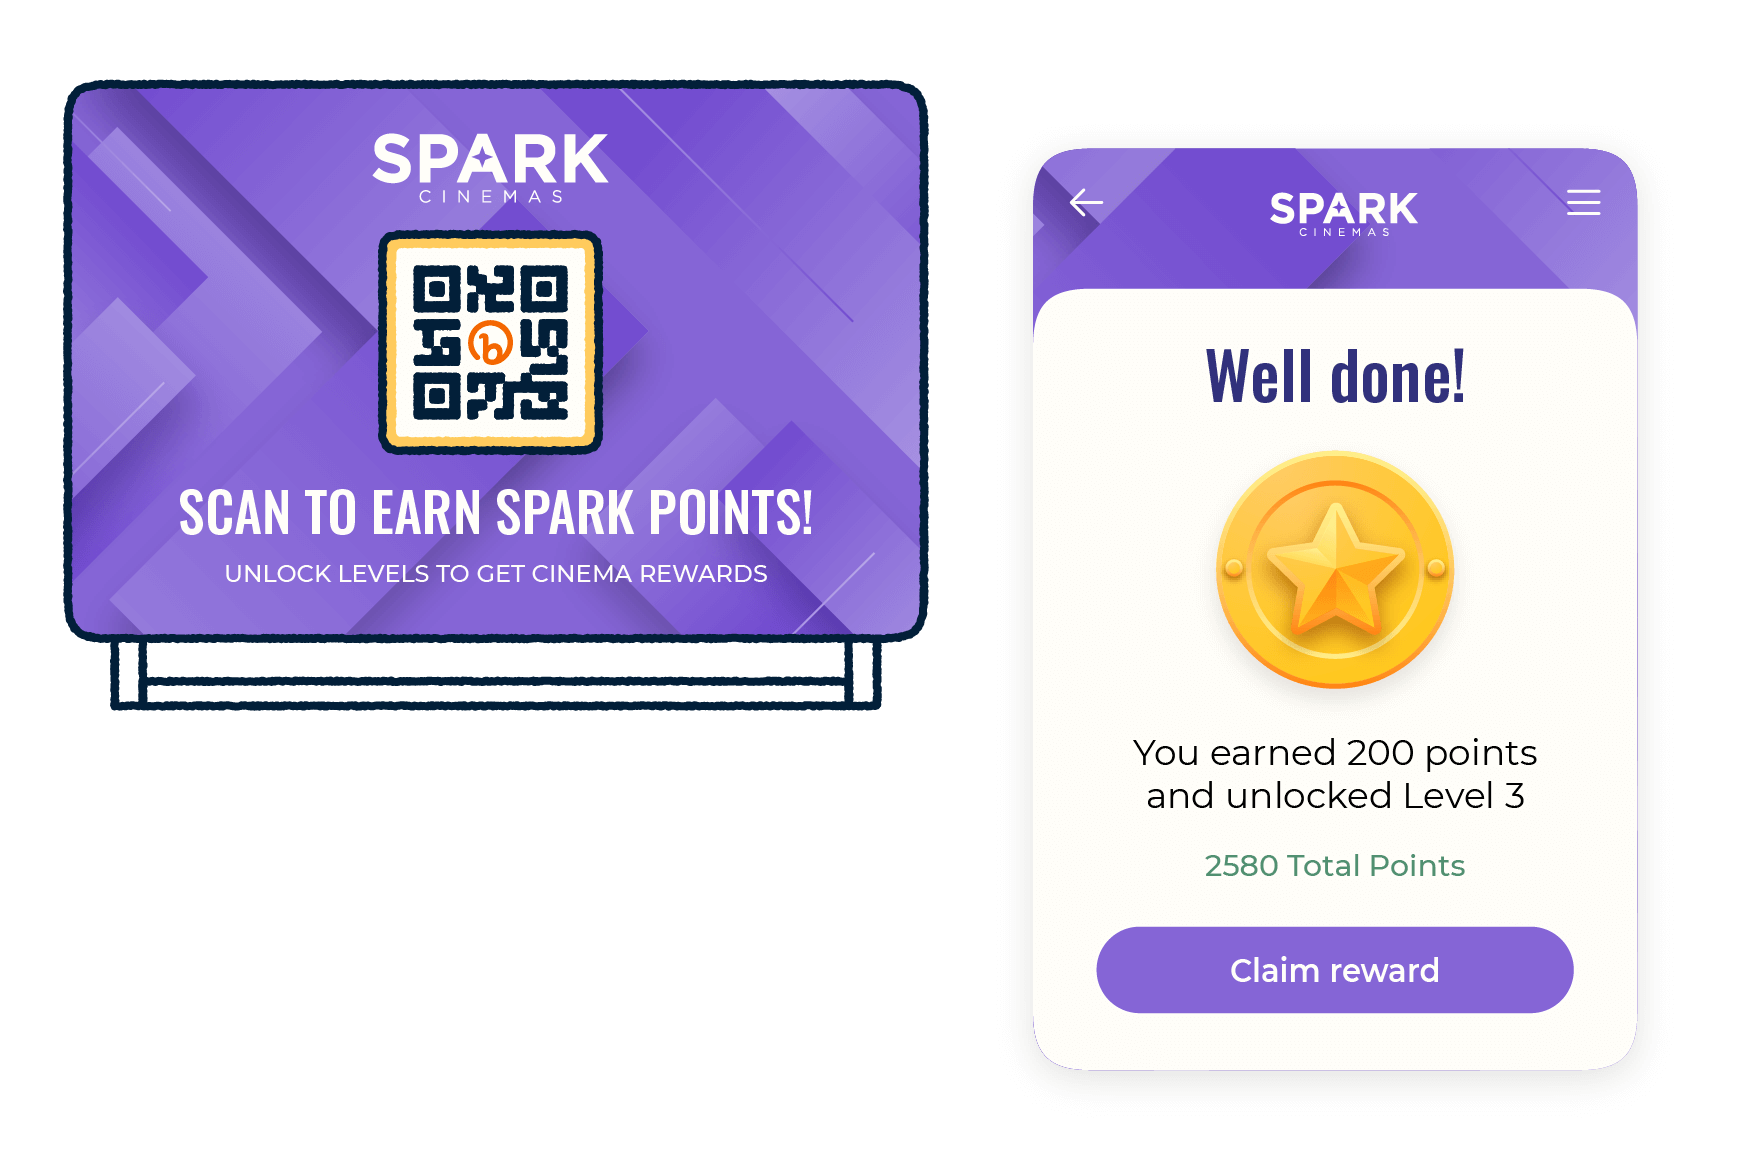 QR Code for Spark Theater rewards points